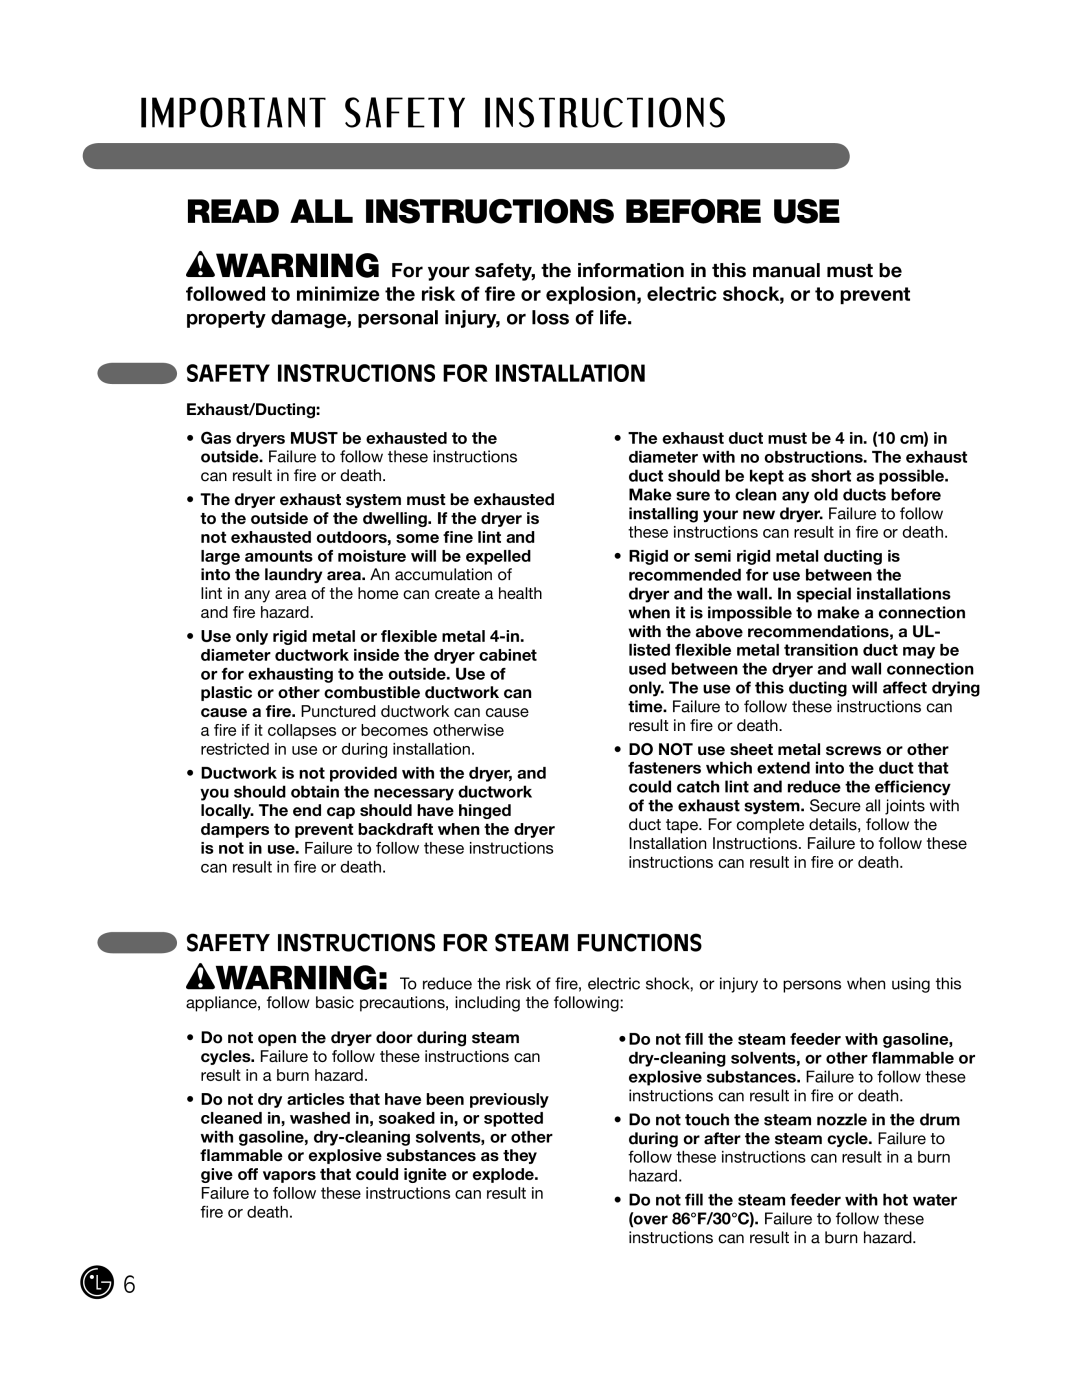 LG Electronics P154 manual Safety Instructions For Steam Functions, Read All Instructions Before Use, Exhaust/Ducting 